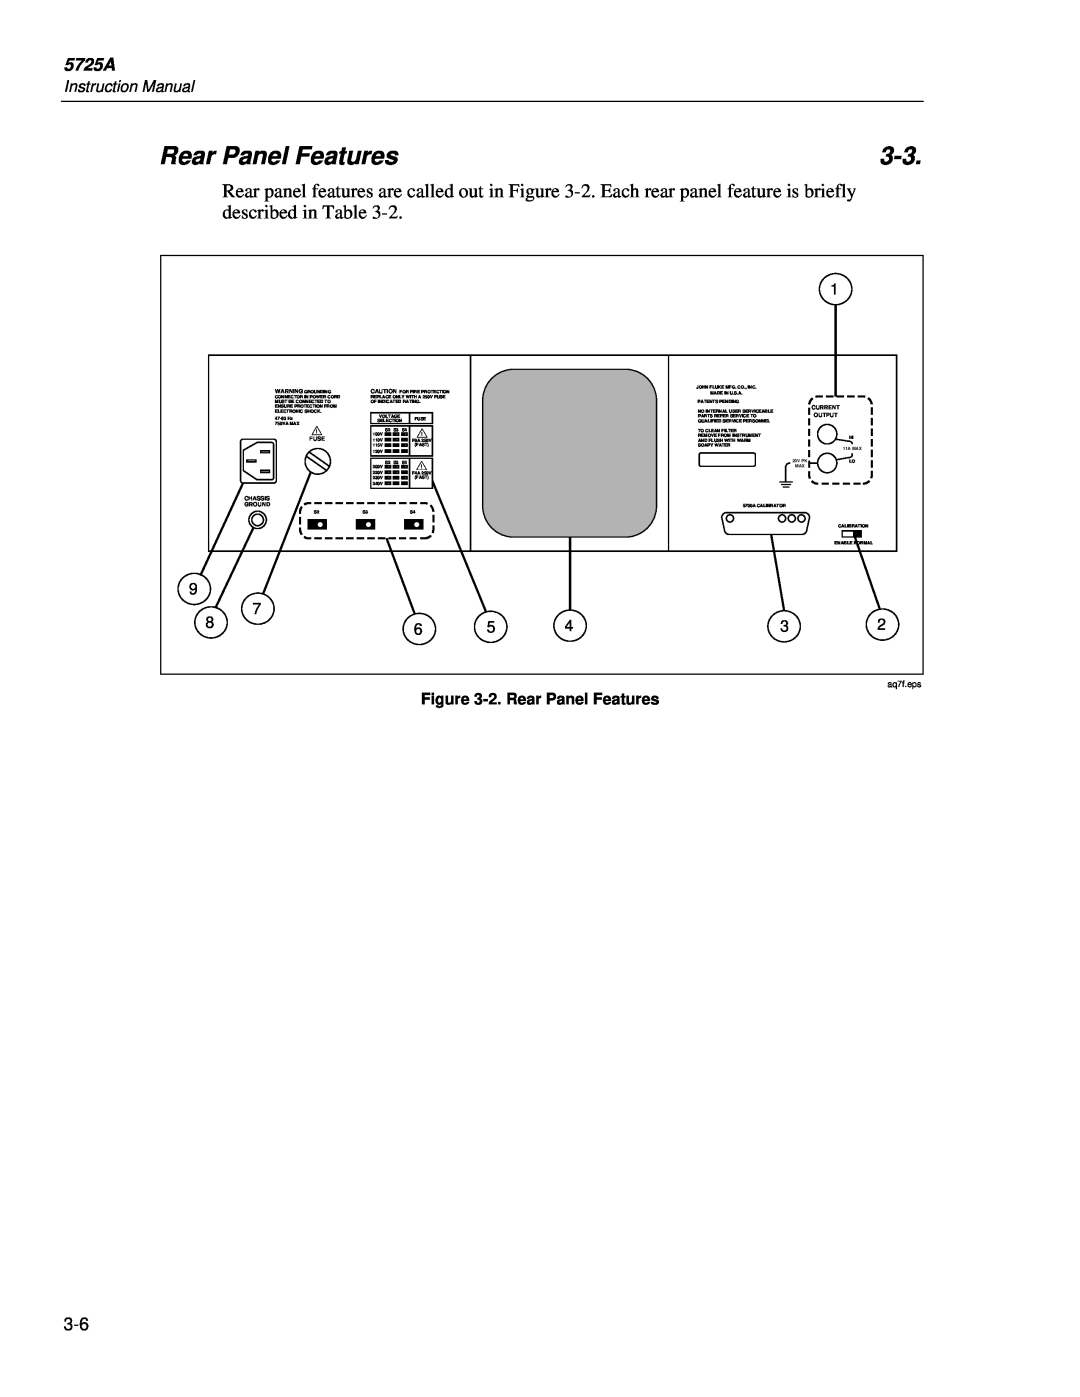 Fluke 5725A Instruction Manual, 2.Rear Panel Features, aq7f.eps, Fuse Chassis Ground, Current, Output 